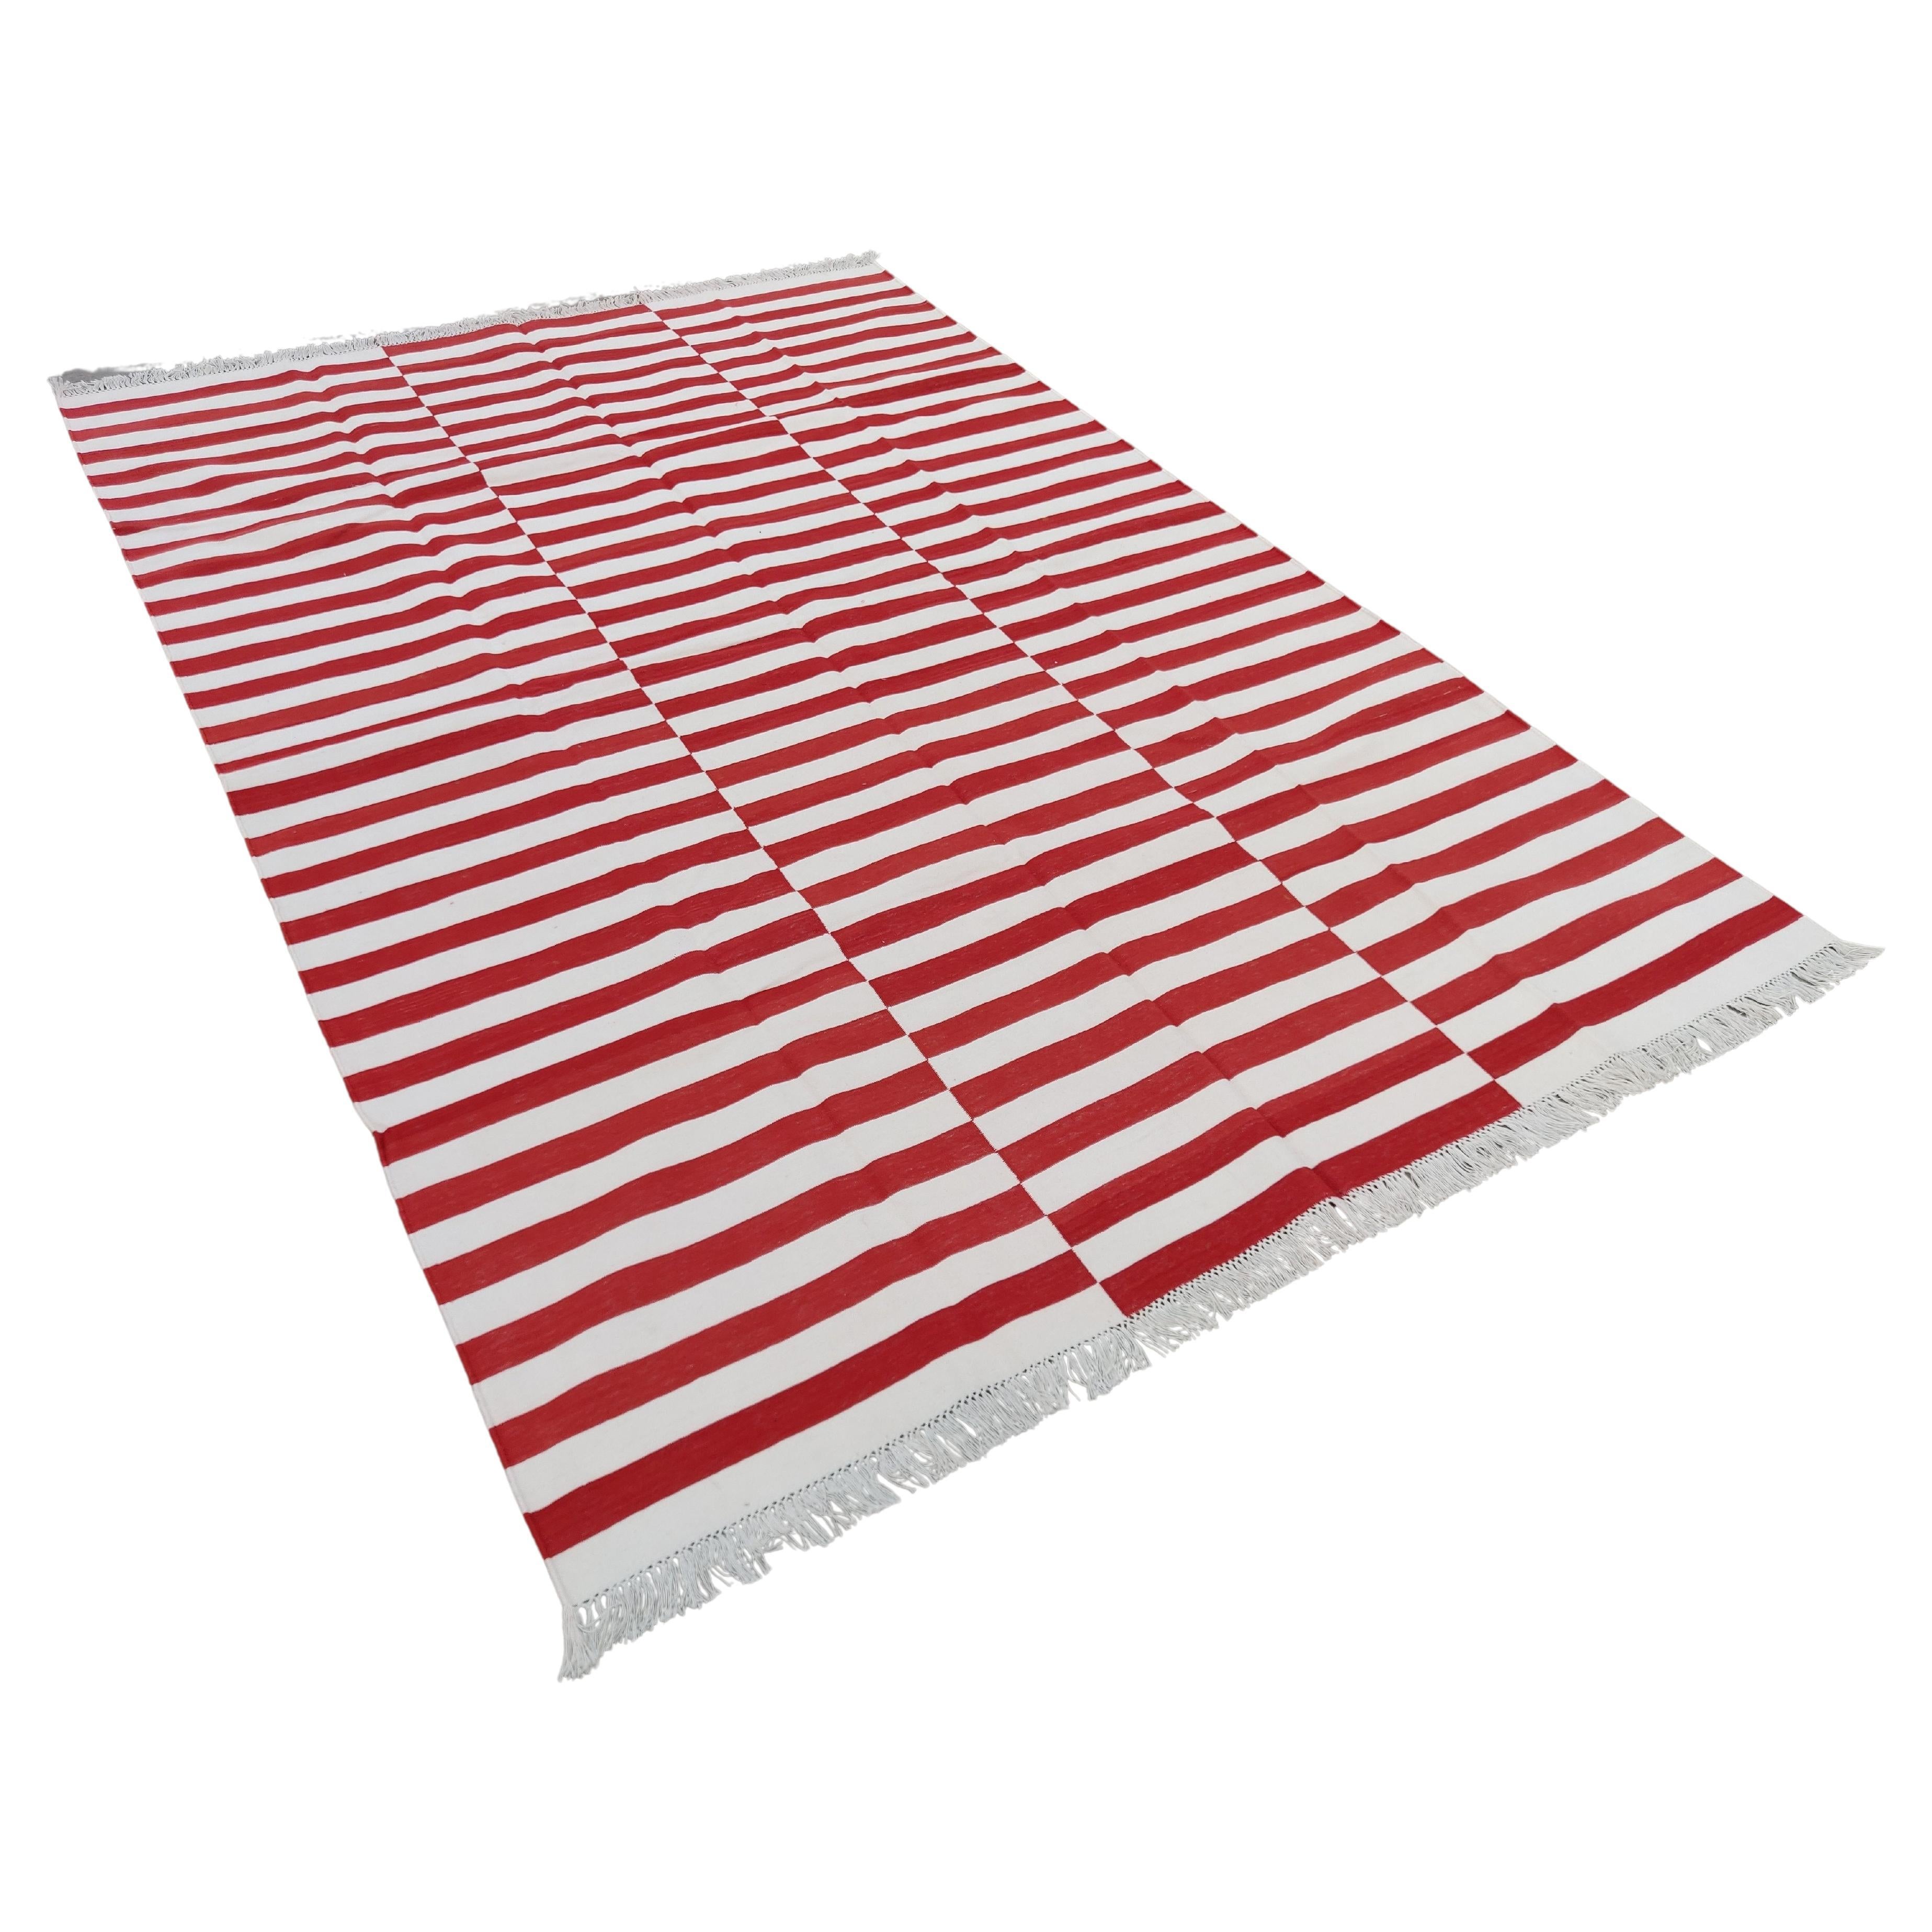 Handmade Cotton Area Flat Weave Rug, 6x9 Red And White Striped Indian Dhurrie For Sale